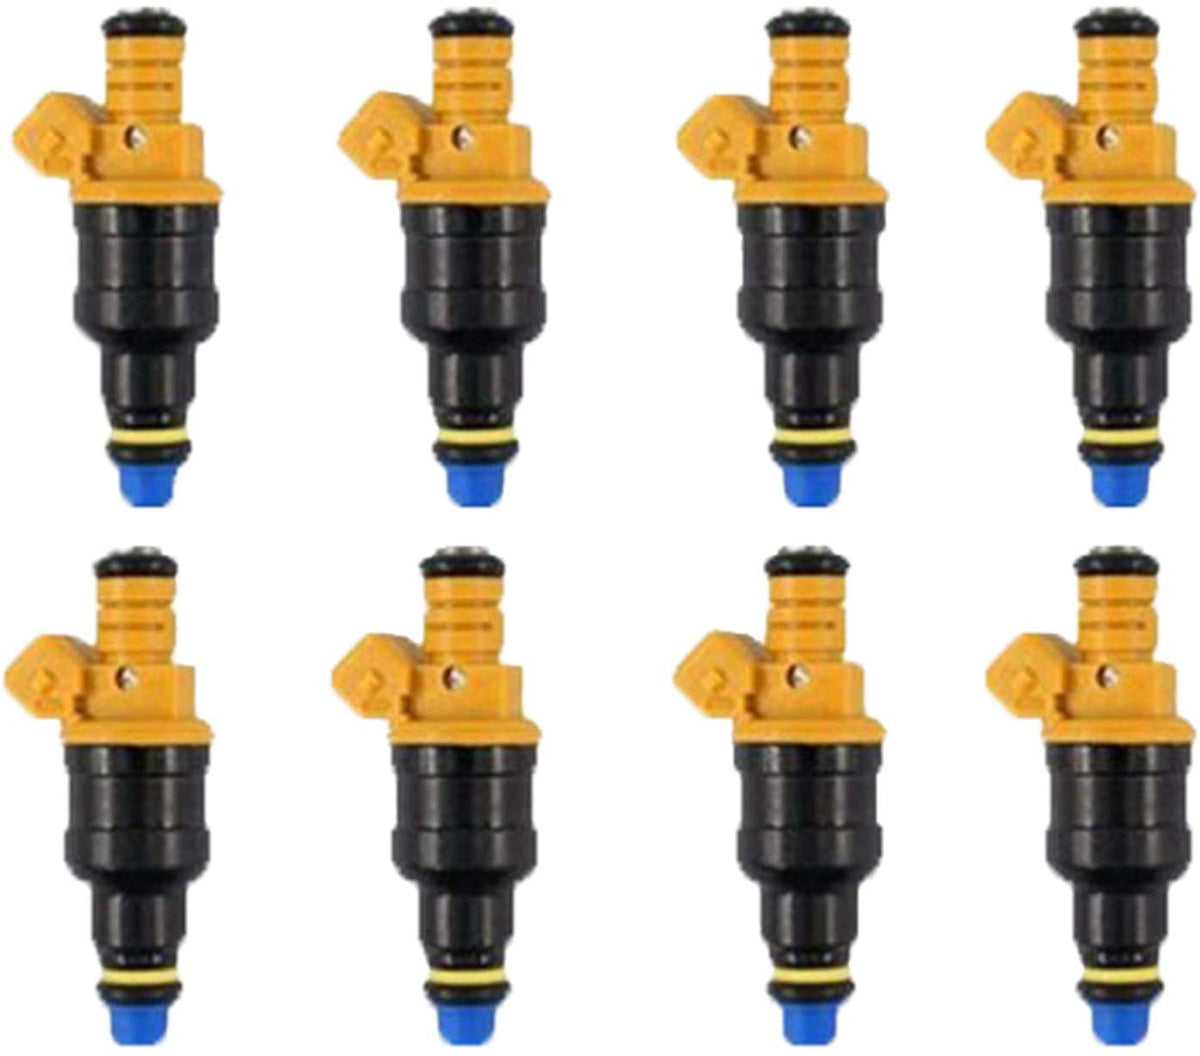 8PCS Fuel Injector Nozzles 0280150943 0280150939 0280150909 for Ford F150 F250 F350 Mustang Expedition Excursion Crown Victoria Bronco Econoline Lincoln 4.6 5.0 5.4 5.8 V8 Engine - KUDUPARTS